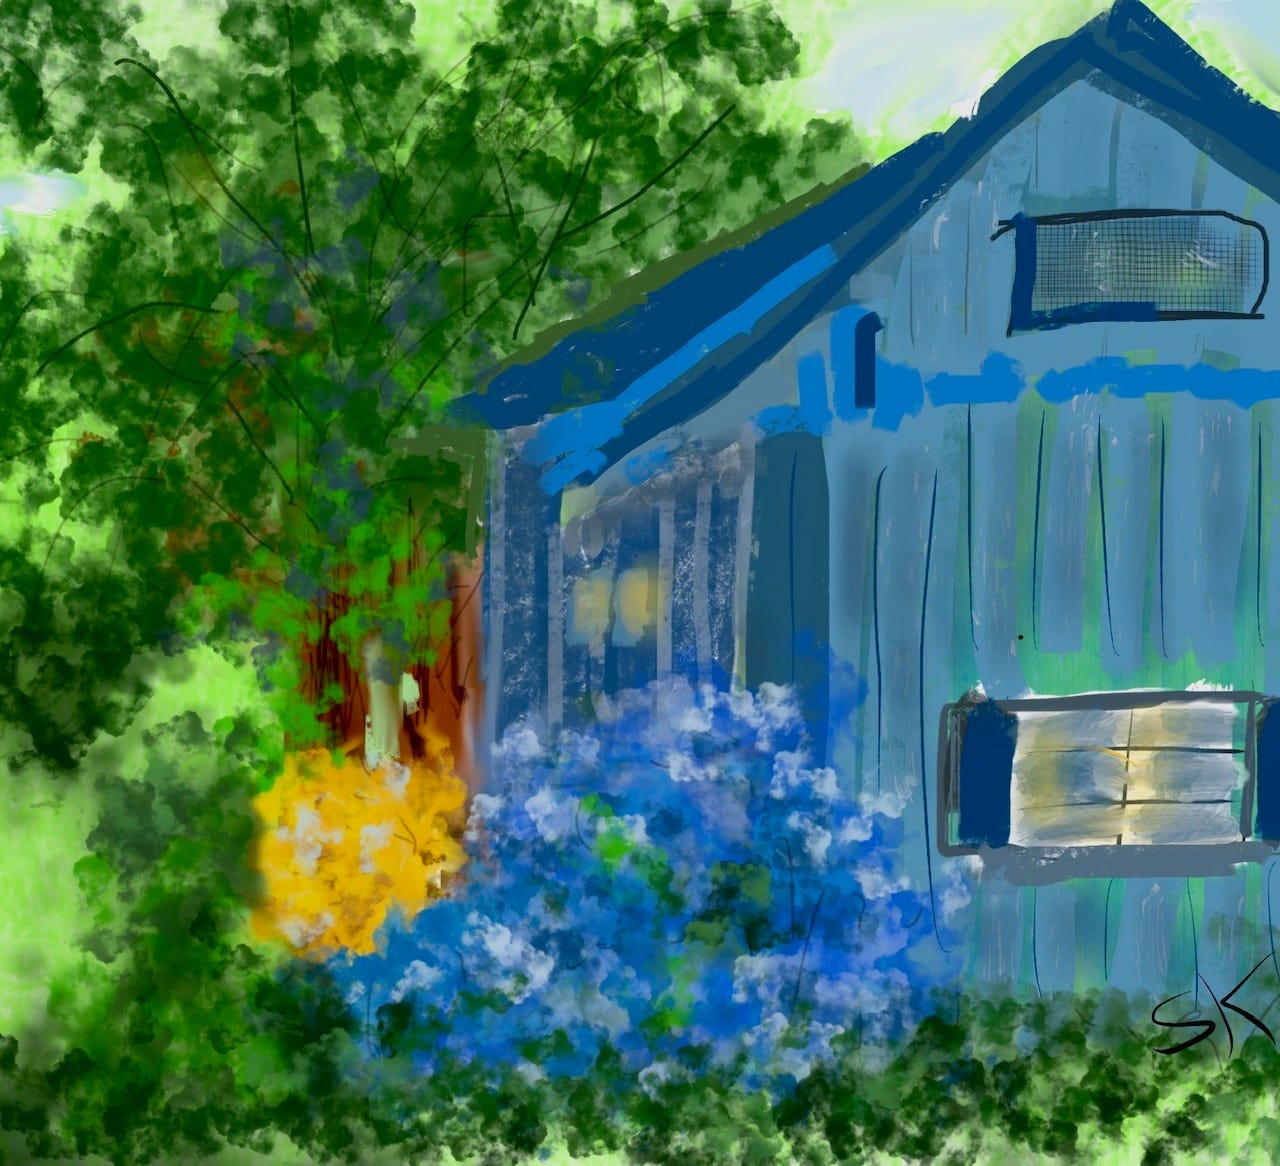 Whimsical painting by Sherry Killam Arts of a blue cottage with flowers and foliage where the artist lived in the 1970s.